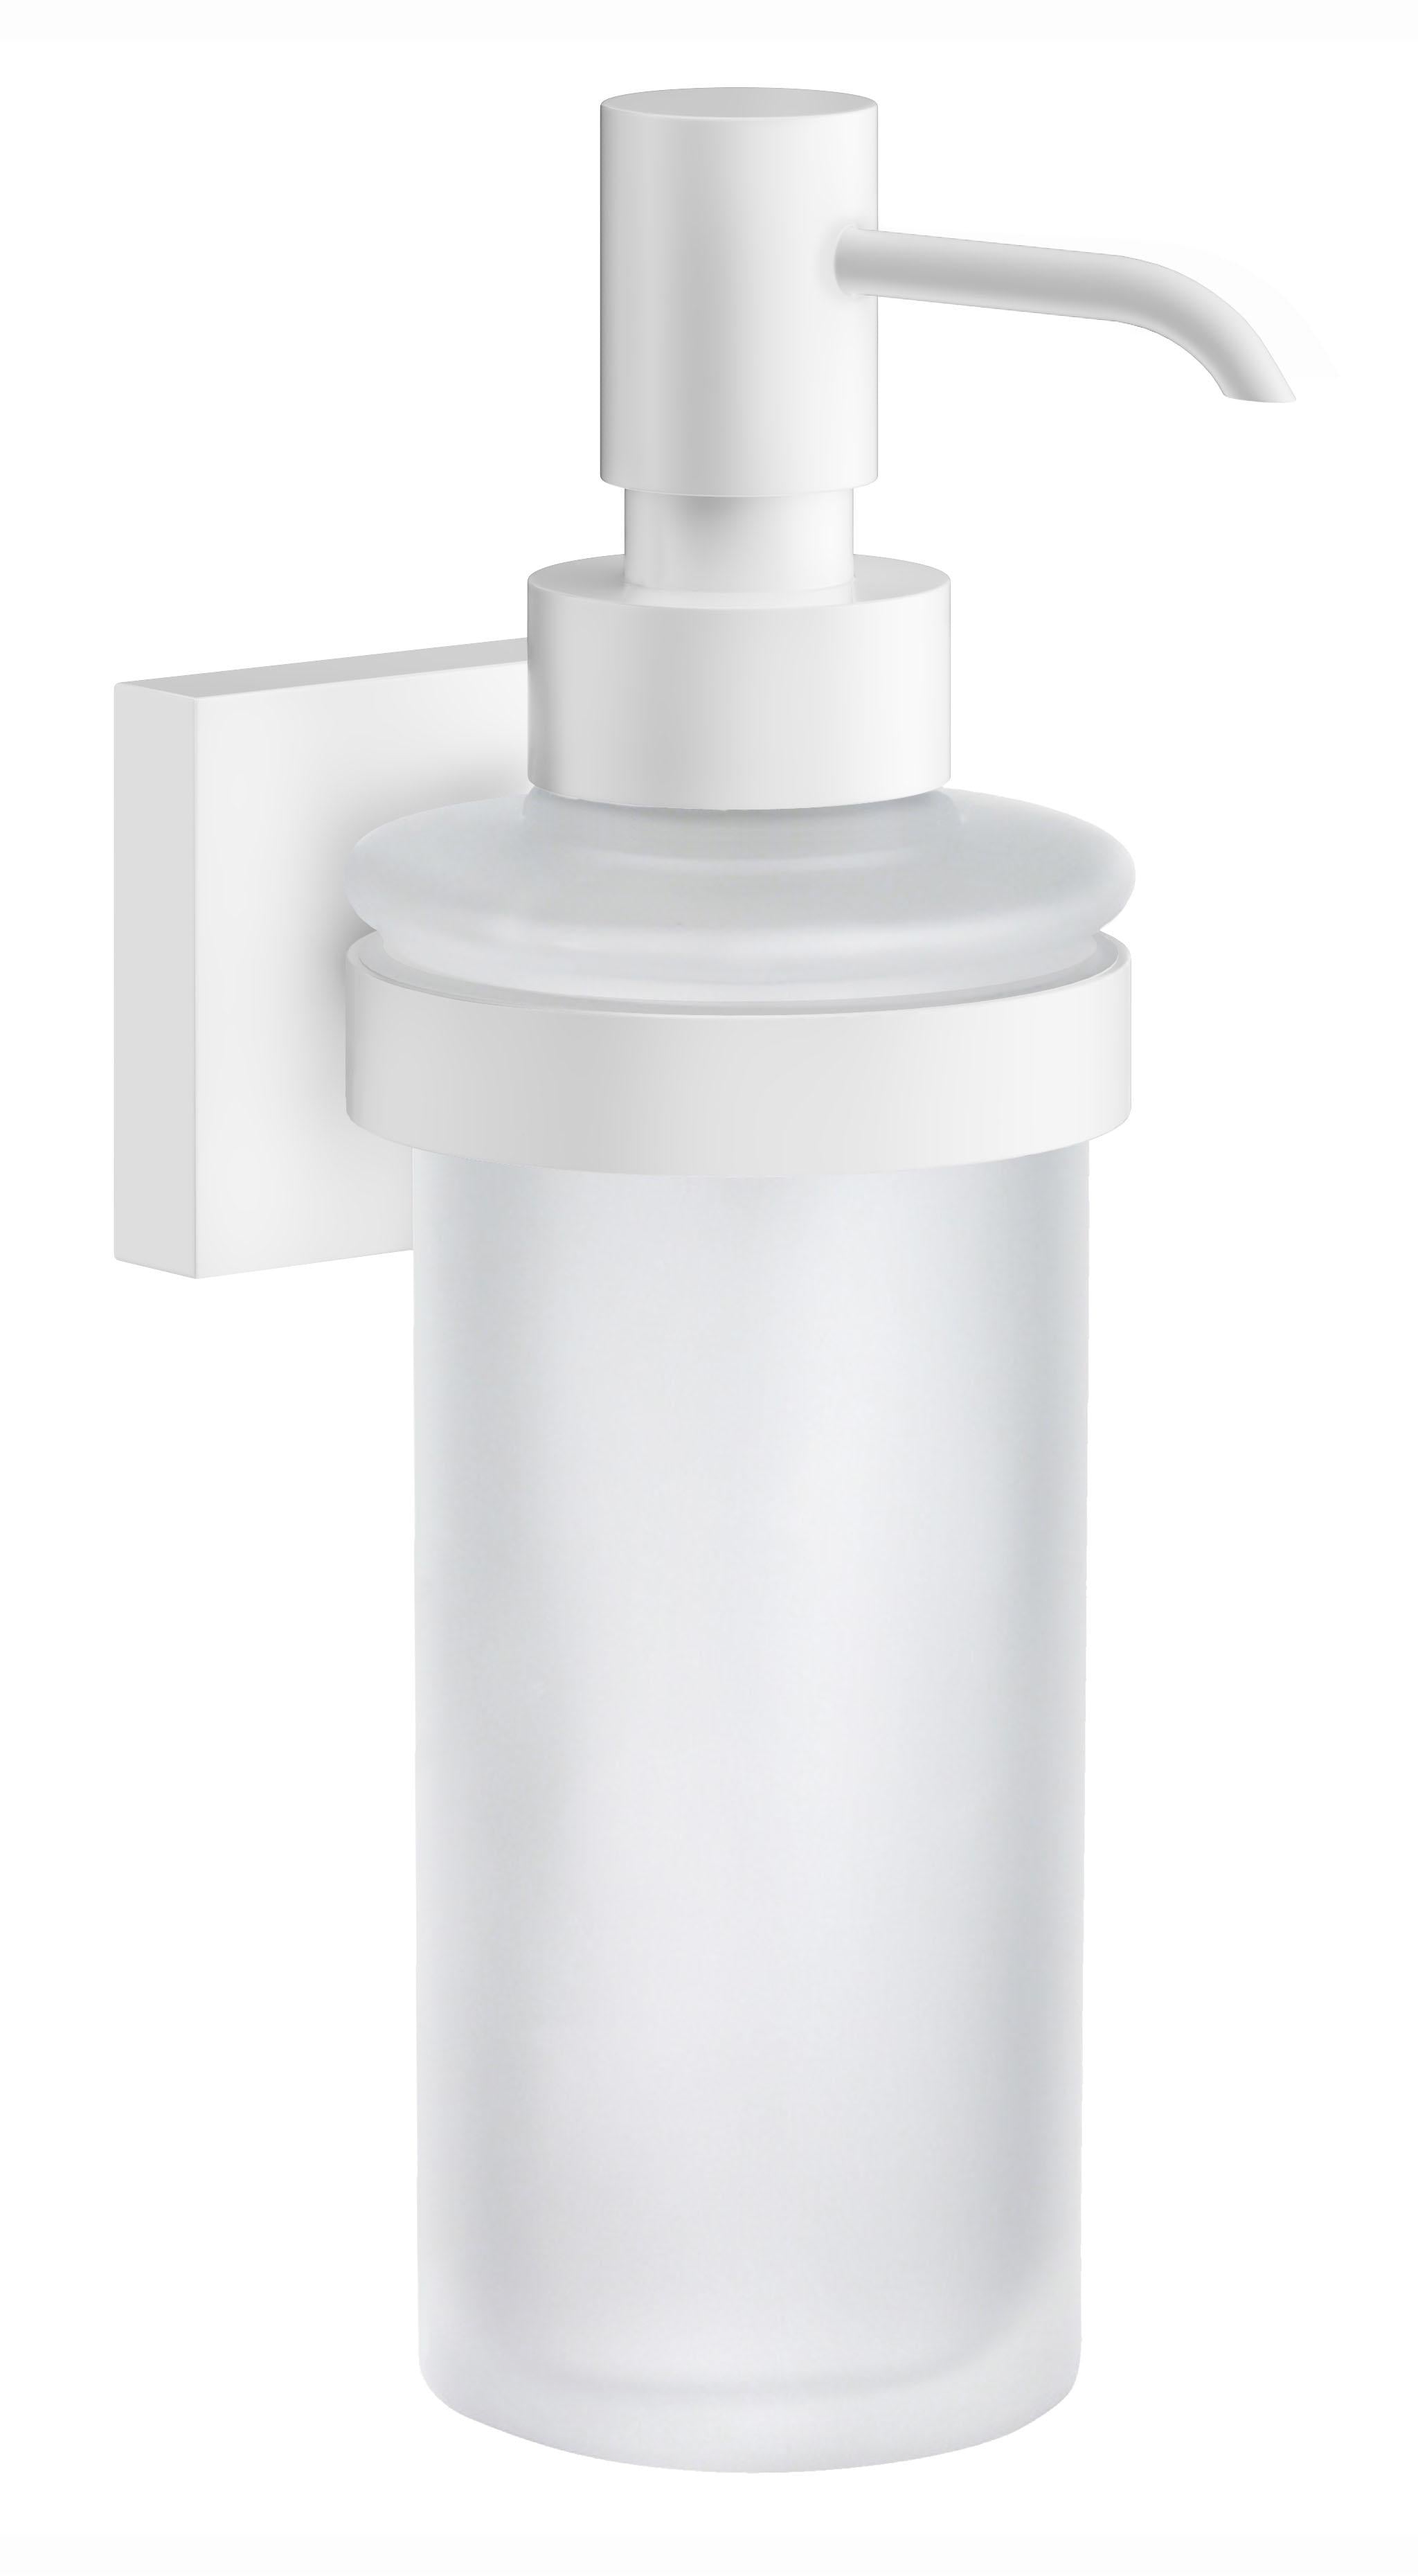 Smedbo House Holder with Frosted Glass Soap Dispenser wall mounted